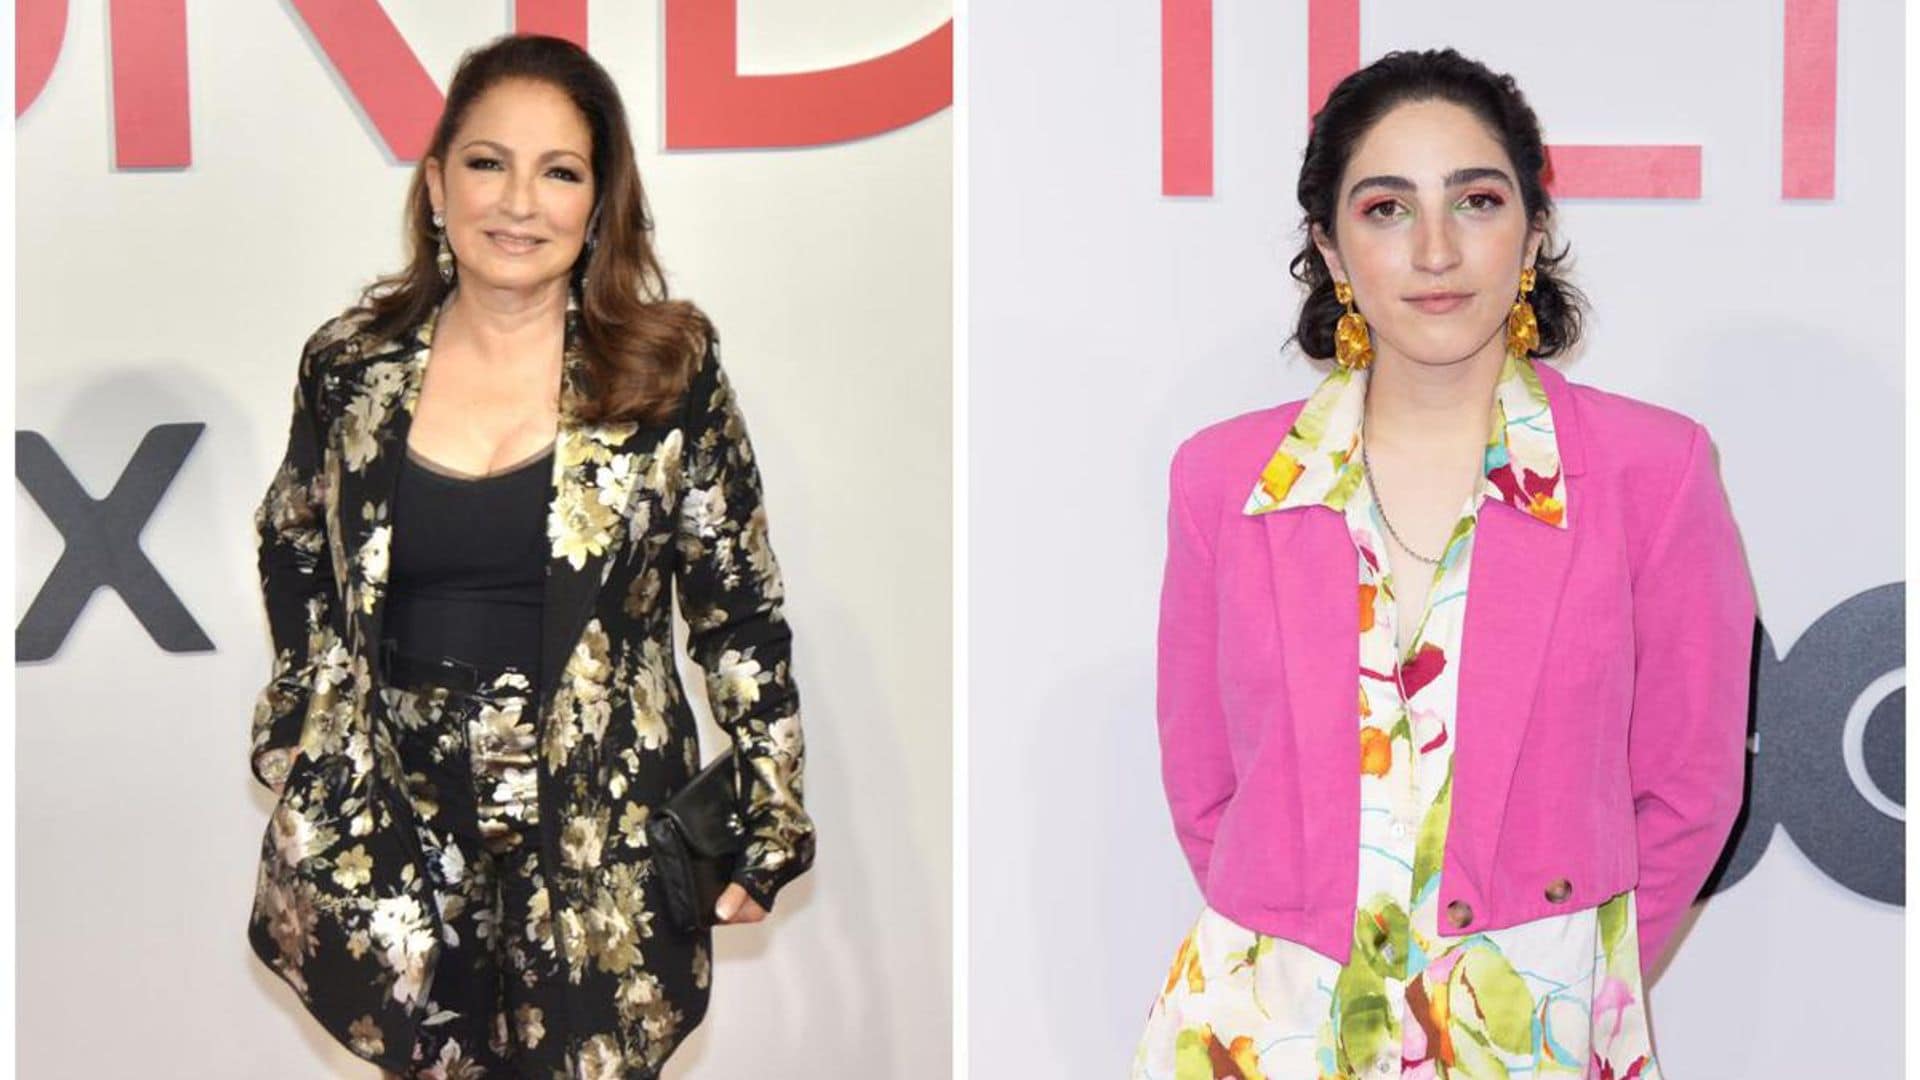 Gloria & Emily Estefan discuss their upbringings and are on the cover of Vogue